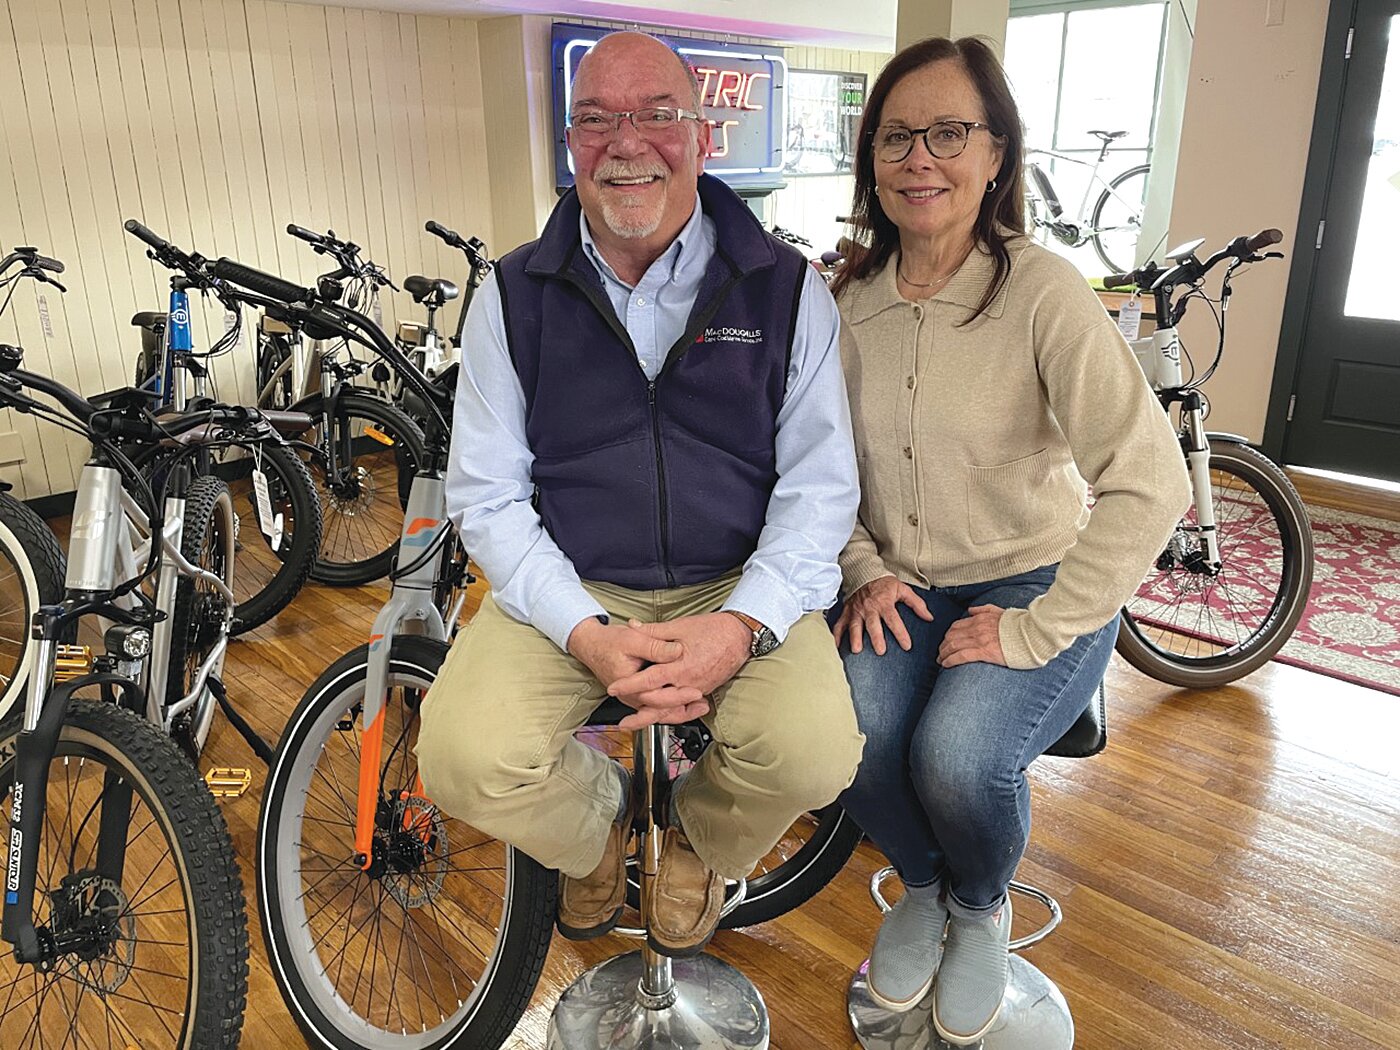 Mark DeStefano and Robin Paradis together run Bristol Bikes, a shop in downtown Bristol that sells and rents electric bicycles. Setting aside irresponsible behavior by riders, they say e-bikes are no more dangerous than traditional bikes, and they believe many of the complaints about e-bikes are based on false perceptions and misinformation.